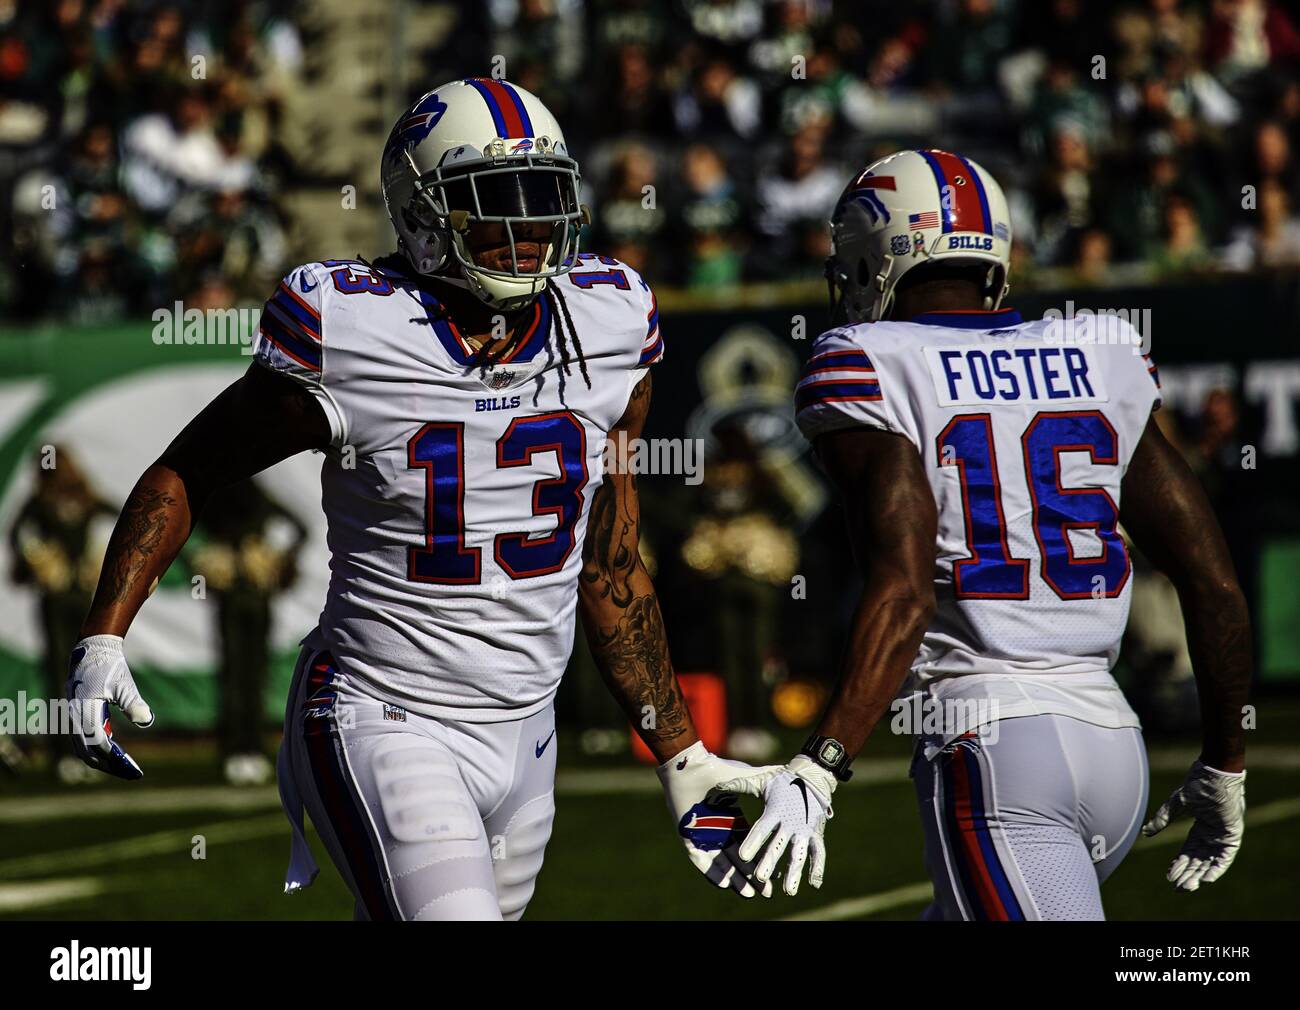 November 11, 2018 - East Rutherford, New Jersey, U.S. - Buffalo Bills wide  receivers Kelvin Benjamin (13) and Robert Foster (16) during a NFL game  between the Buffalo Bills and the New